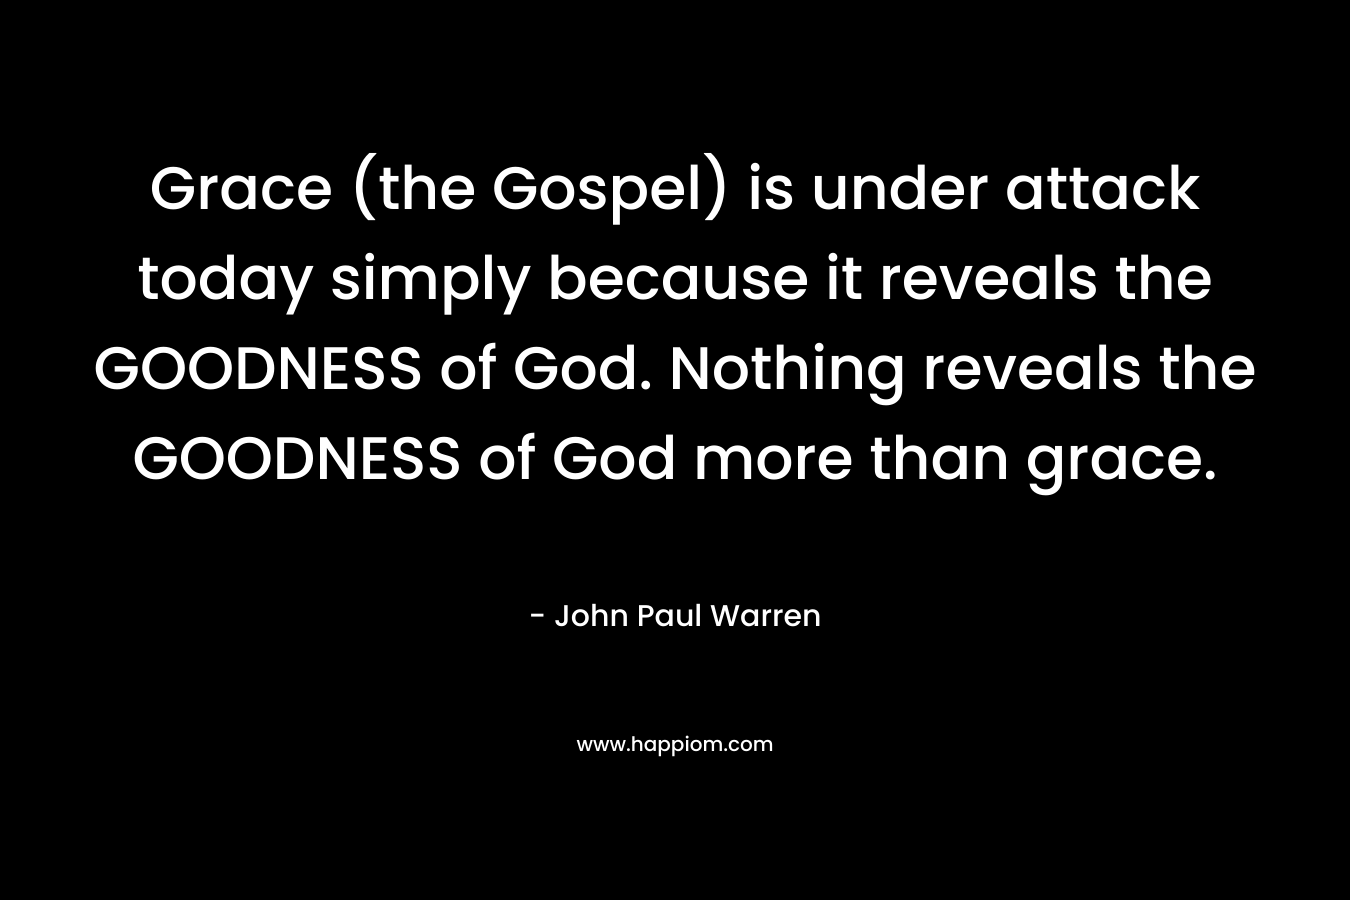 Grace (the Gospel) is under attack today simply because it reveals the GOODNESS of God. Nothing reveals the GOODNESS of God more than grace. – John Paul Warren